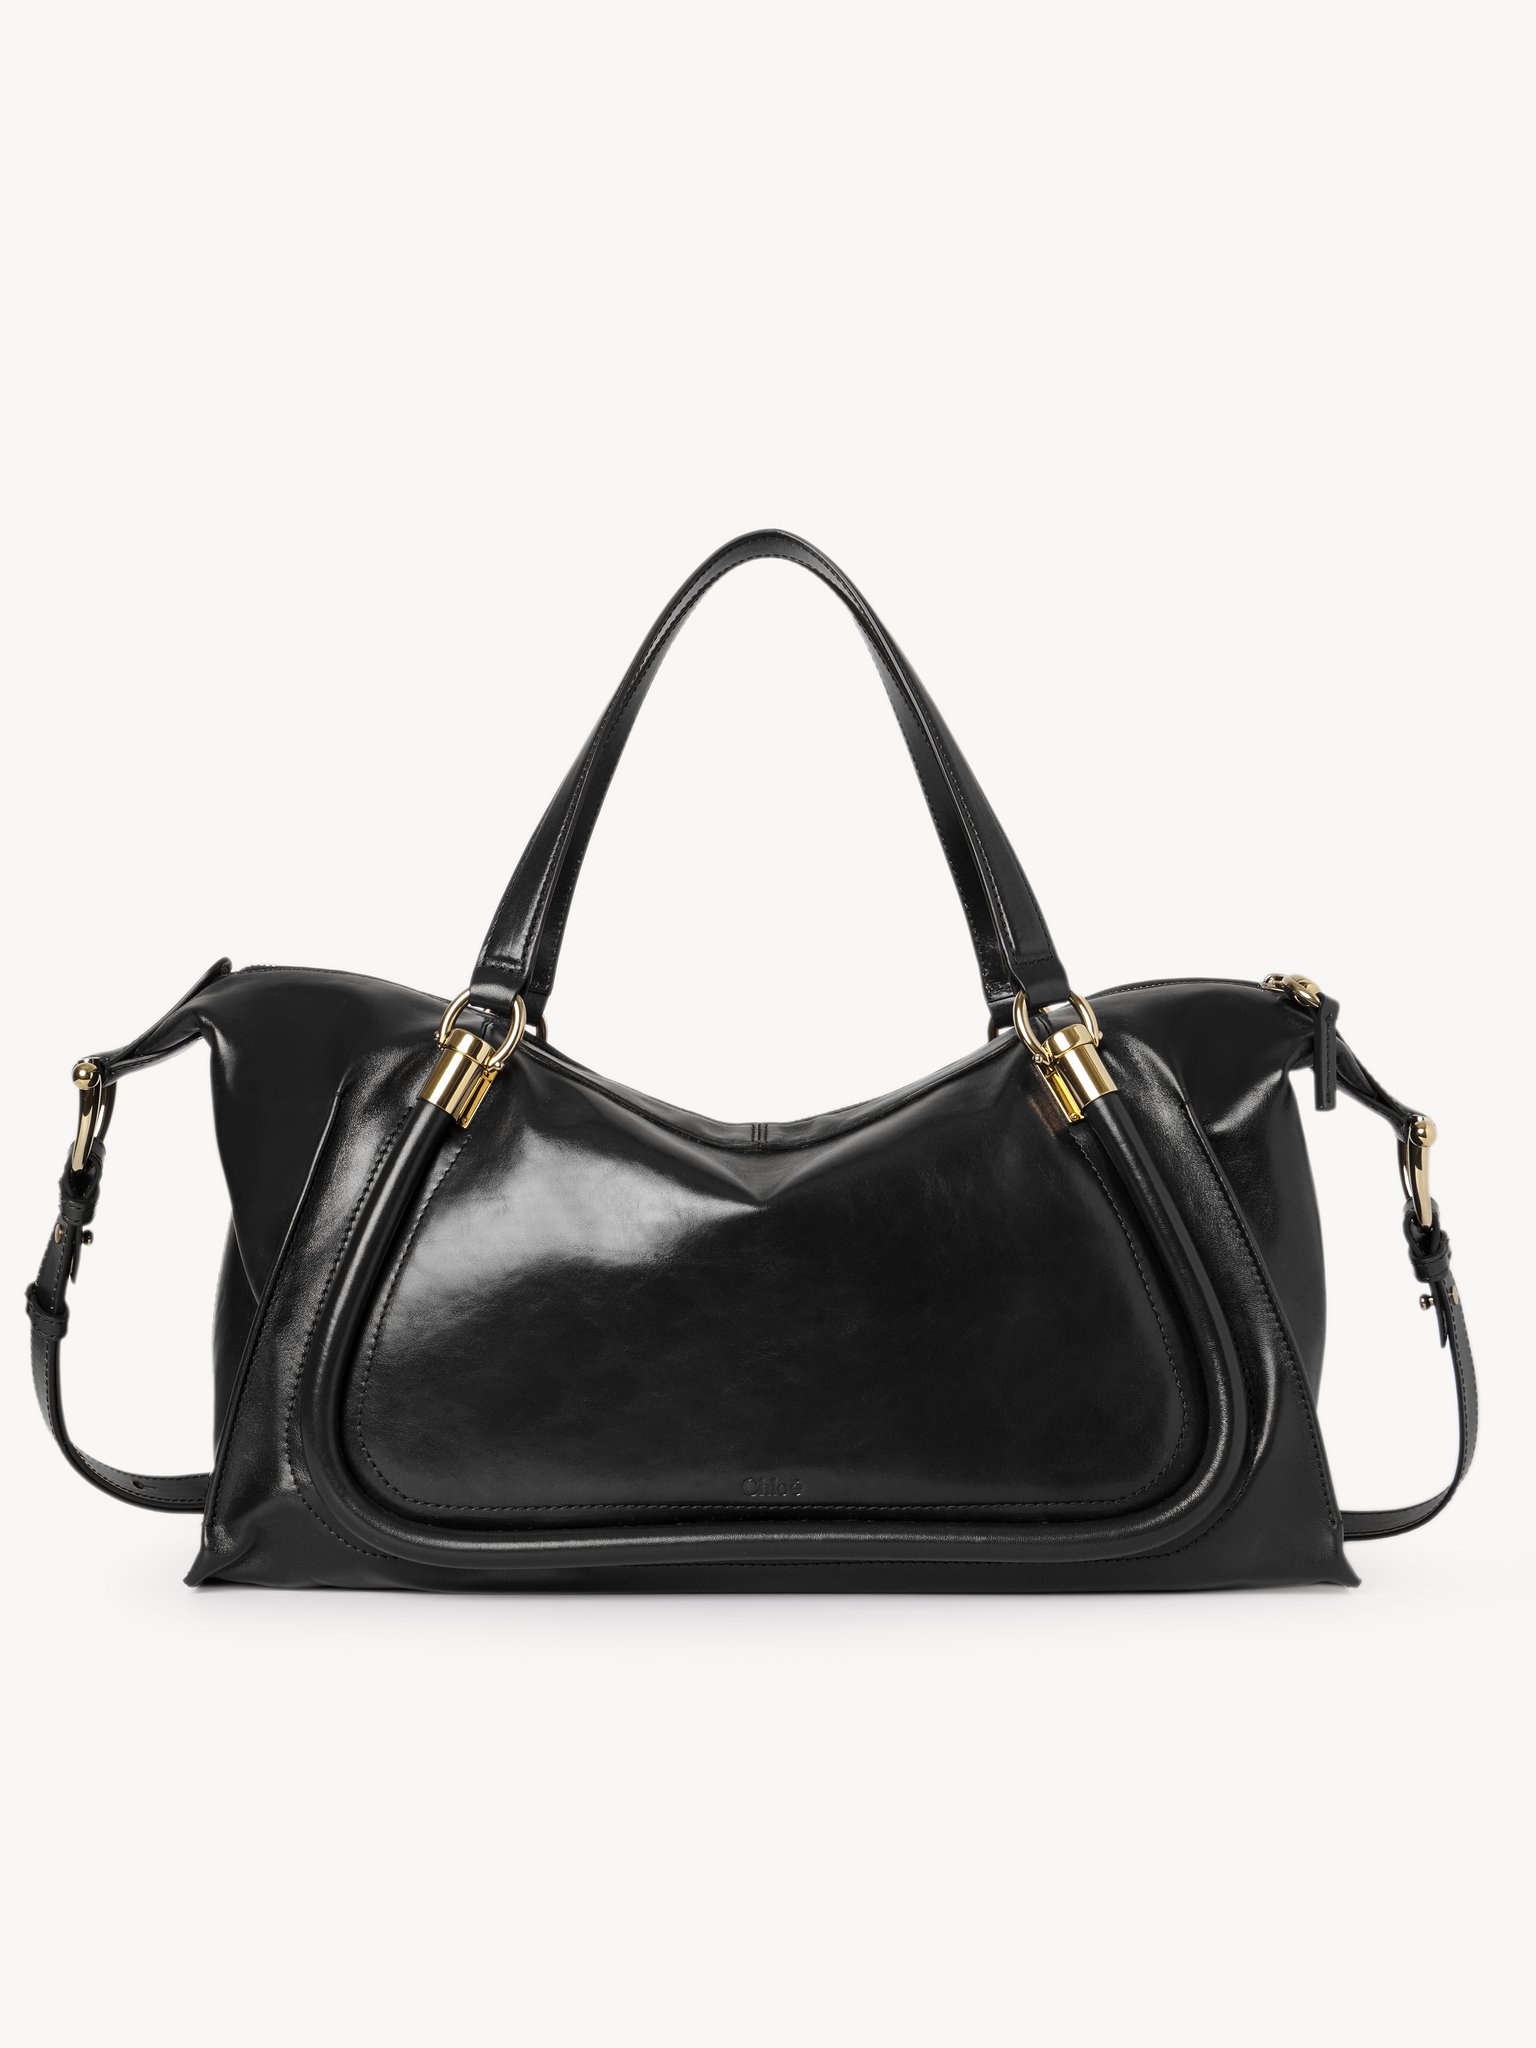 PARATY 24 BAG IN SOFT LEATHER - 1